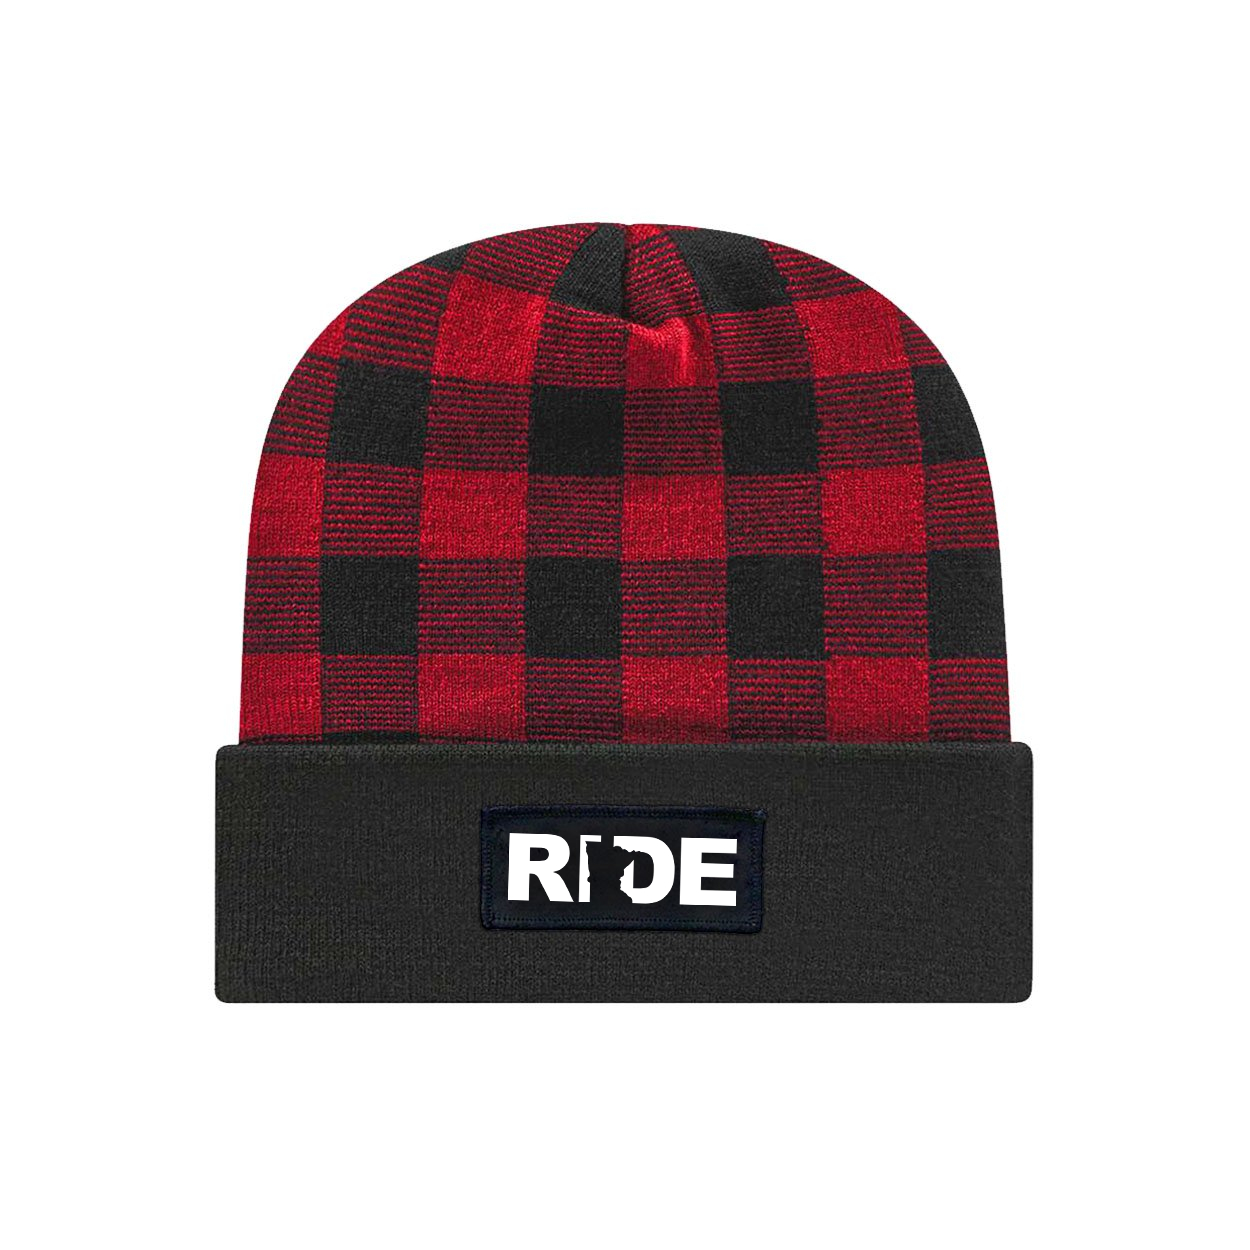 Ride Minnesota Night Out Woven Patch Roll Up Plaid Beanie Black/True Red (White Logo)